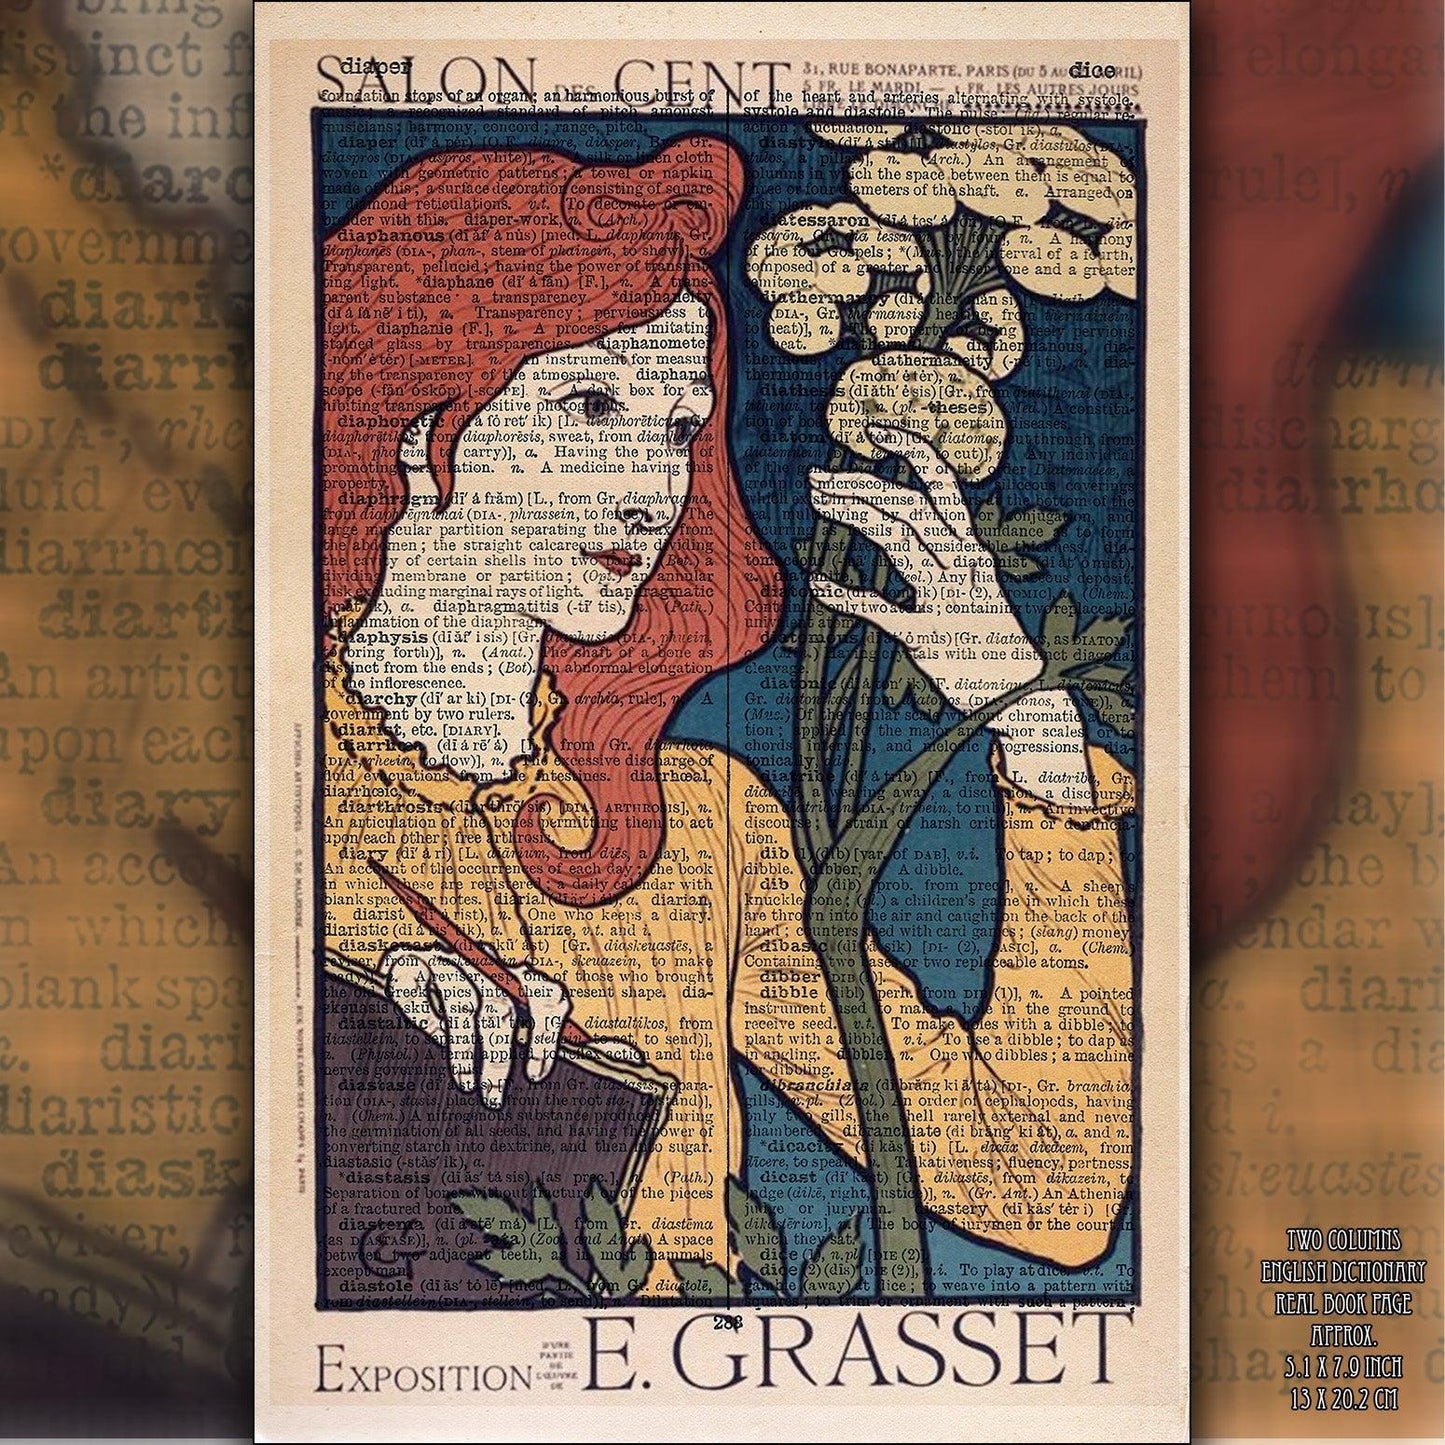 Give your home decor a touch of elegance through our exquisite Salon des Cent Exposition poster reproduction poster. The artwork is a collage with the illustration for the poster for an exhibition of works by Grasset created by Eugène Grasset (Swiss graphic designer, ca. 1841-1917). Year of created 1894.